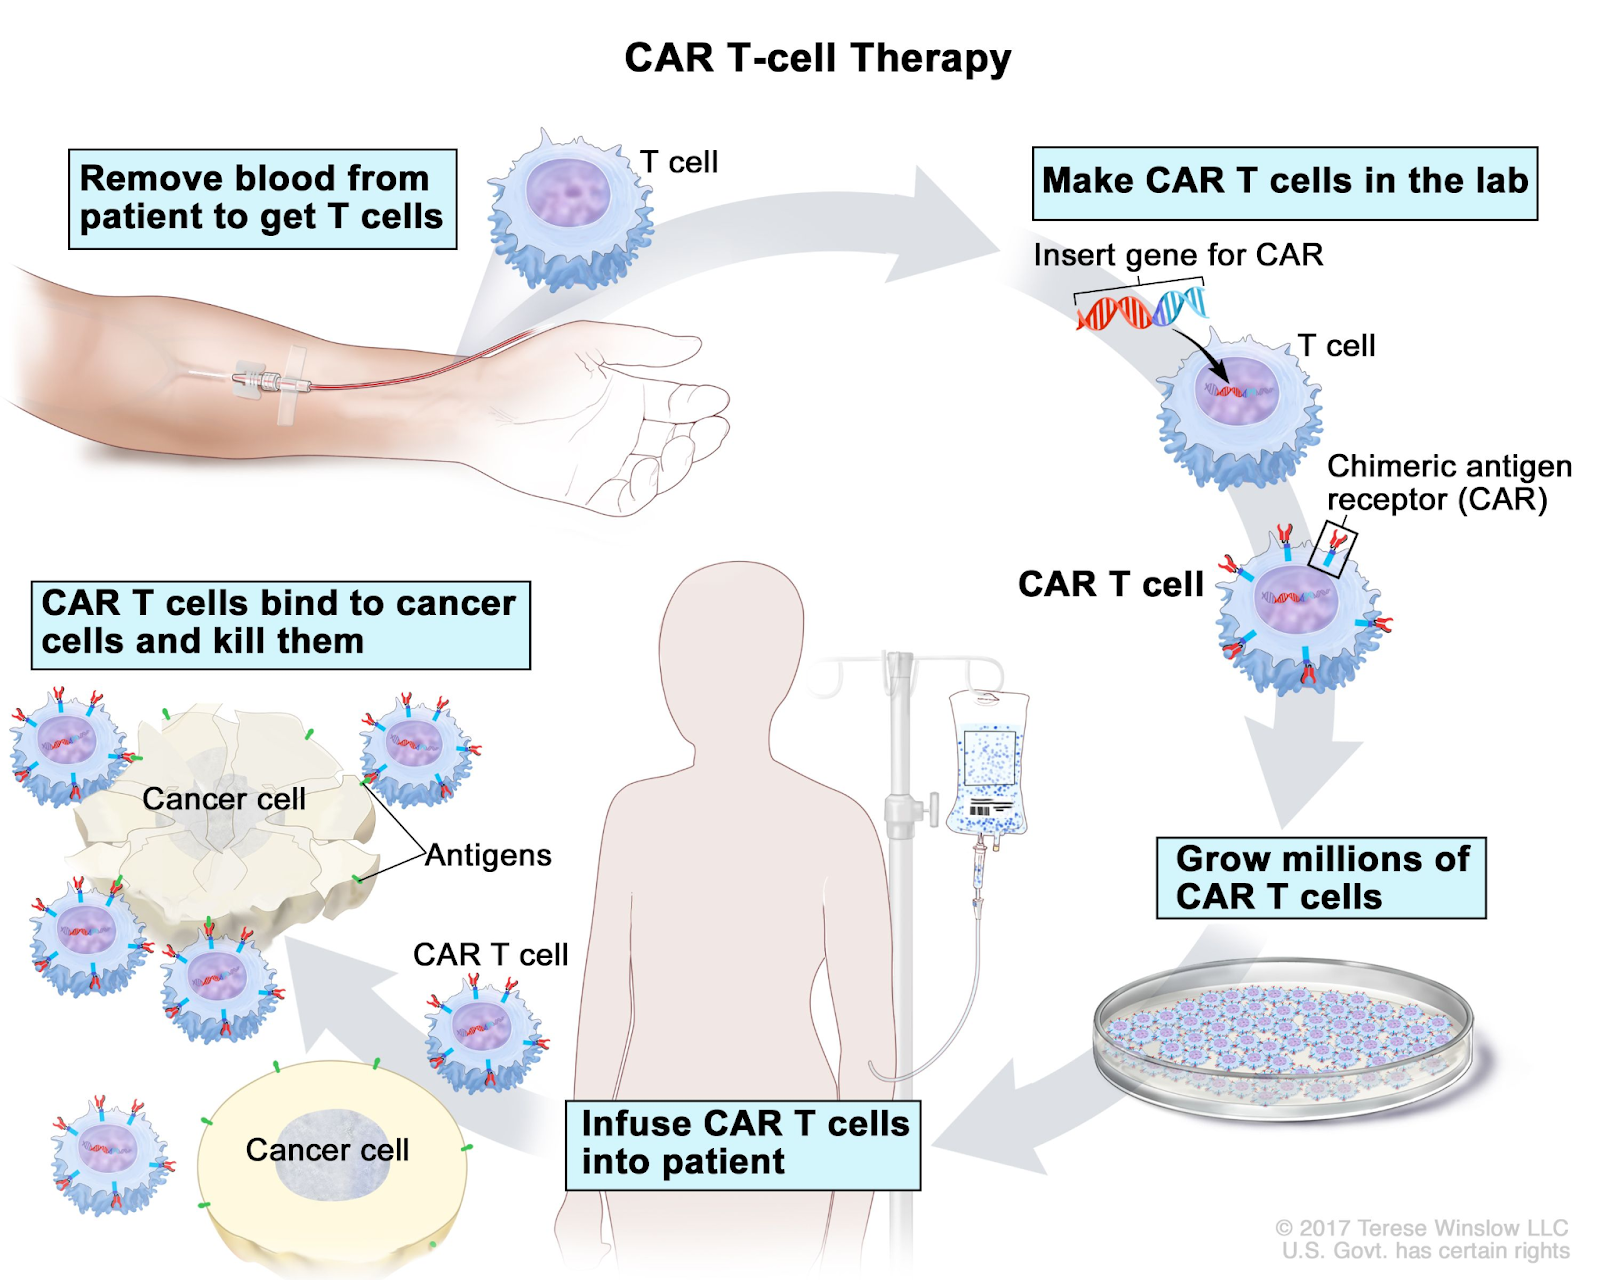 Chimeric Antigen Receptor (CAR)-T Cell Therapy